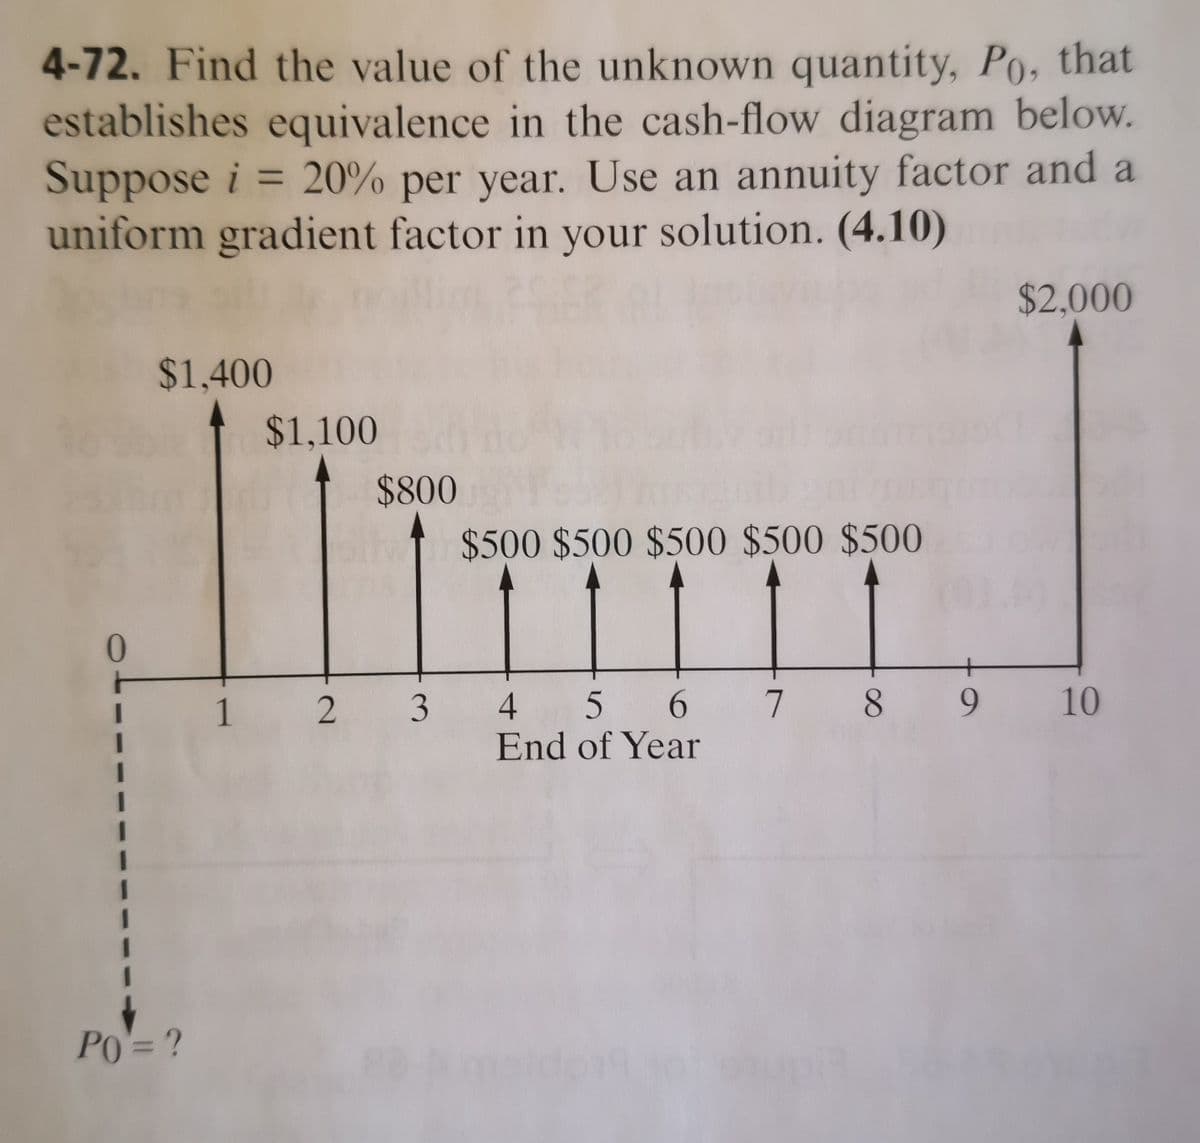 4-72. Find the value of the unknown quantity, Po, that
establishes equivalence in the cash-flow diagram below.
Suppose i = 20% per year. Use an annuity factor and a
uniform gradient factor in your solution. (4.10)
$2,000
$1,400
$1,100
$800
$500 $500 $500 $500 $500
1
2
3 4
5 6
7 8
9.
10
End of Year
PO= ?
